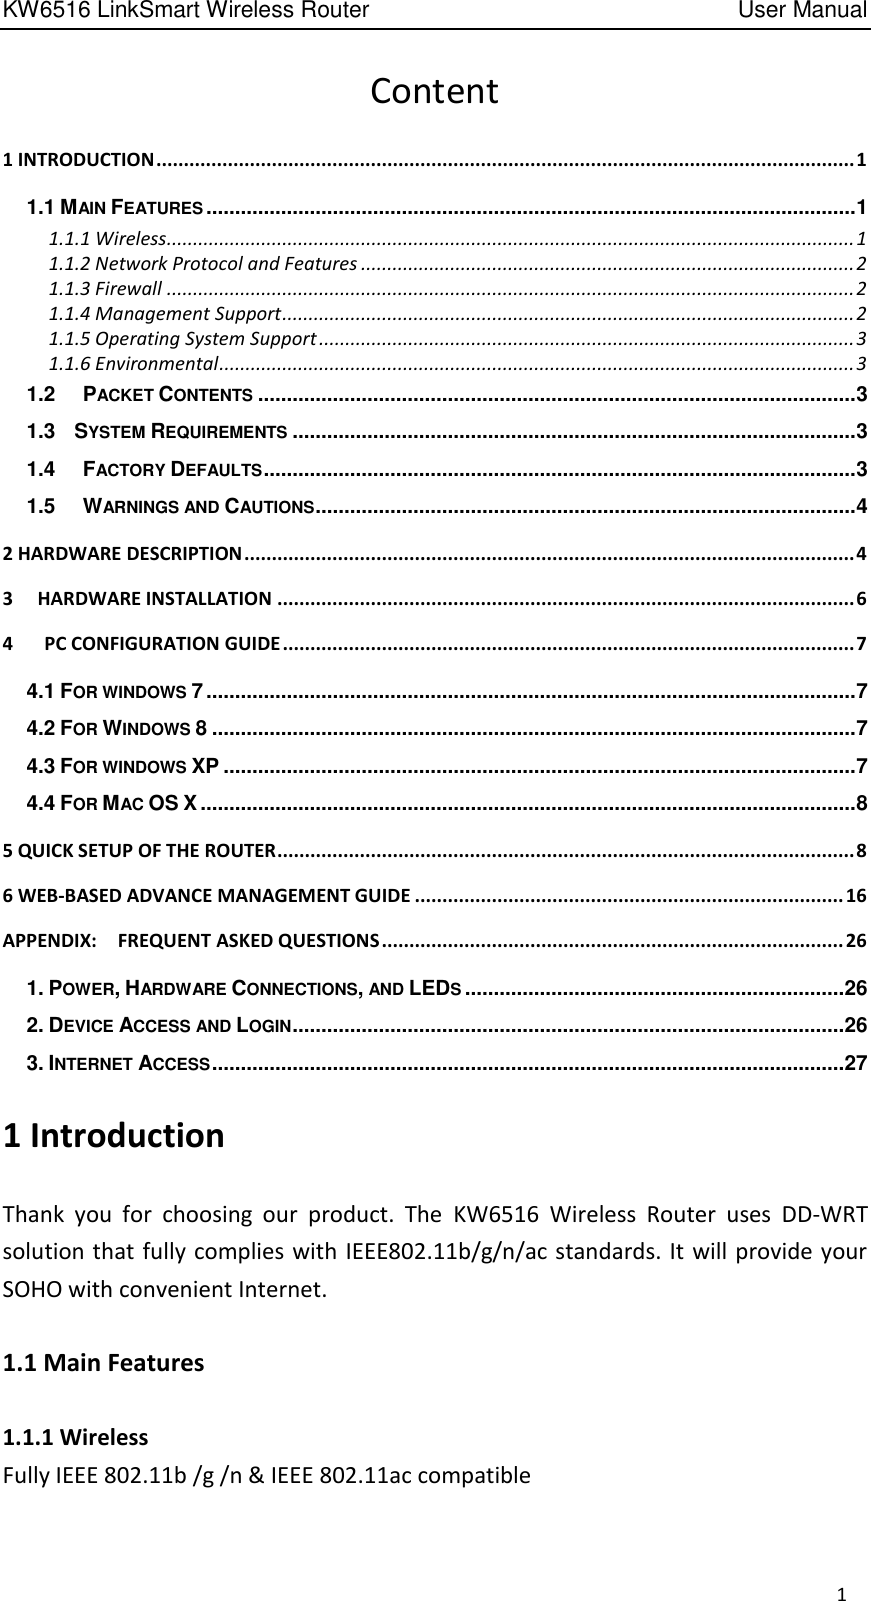 KW6516 LinkSmart Wireless Router         User Manual 1 Content 1 INTRODUCTION ............................................................................................................................... 1 1.1 MAIN FEATURES ................................................................................................................. 1 1.1.1 Wireless................................................................................................................................... 1 1.1.2 Network Protocol and Features .............................................................................................. 2 1.1.3 Firewall ................................................................................................................................... 2 1.1.4 Management Support ............................................................................................................. 2 1.1.5 Operating System Support ...................................................................................................... 3 1.1.6 Environmental ......................................................................................................................... 3 1.2  PACKET CONTENTS ........................................................................................................ 3 1.3 SYSTEM REQUIREMENTS .................................................................................................. 3 1.4  FACTORY DEFAULTS ....................................................................................................... 3 1.5  WARNINGS AND CAUTIONS .............................................................................................. 4 2 HARDWARE DESCRIPTION ............................................................................................................... 4 3 HARDWARE INSTALLATION ......................................................................................................... 6 4      PC CONFIGURATION GUIDE ........................................................................................................ 7 4.1 FOR WINDOWS 7 ................................................................................................................. 7 4.2 FOR WINDOWS 8 ................................................................................................................ 7 4.3 FOR WINDOWS XP .............................................................................................................. 7 4.4 FOR MAC OS X .................................................................................................................. 8 5 QUICK SETUP OF THE ROUTER ......................................................................................................... 8 6 WEB-BASED ADVANCE MANAGEMENT GUIDE .............................................................................. 16 APPENDIX:    FREQUENT ASKED QUESTIONS .................................................................................... 26 1. POWER, HARDWARE CONNECTIONS, AND LEDS .................................................................. 26 2. DEVICE ACCESS AND LOGIN ................................................................................................ 26 3. INTERNET ACCESS .............................................................................................................. 27 1 Introduction Thank  you  for  choosing  our  product.  The  KW6516  Wireless  Router  uses  DD-WRT solution that fully complies with IEEE802.11b/g/n/ac standards. It will provide your SOHO with convenient Internet. 1.1 Main Features 1.1.1 Wireless Fully IEEE 802.11b /g /n &amp; IEEE 802.11ac compatible 